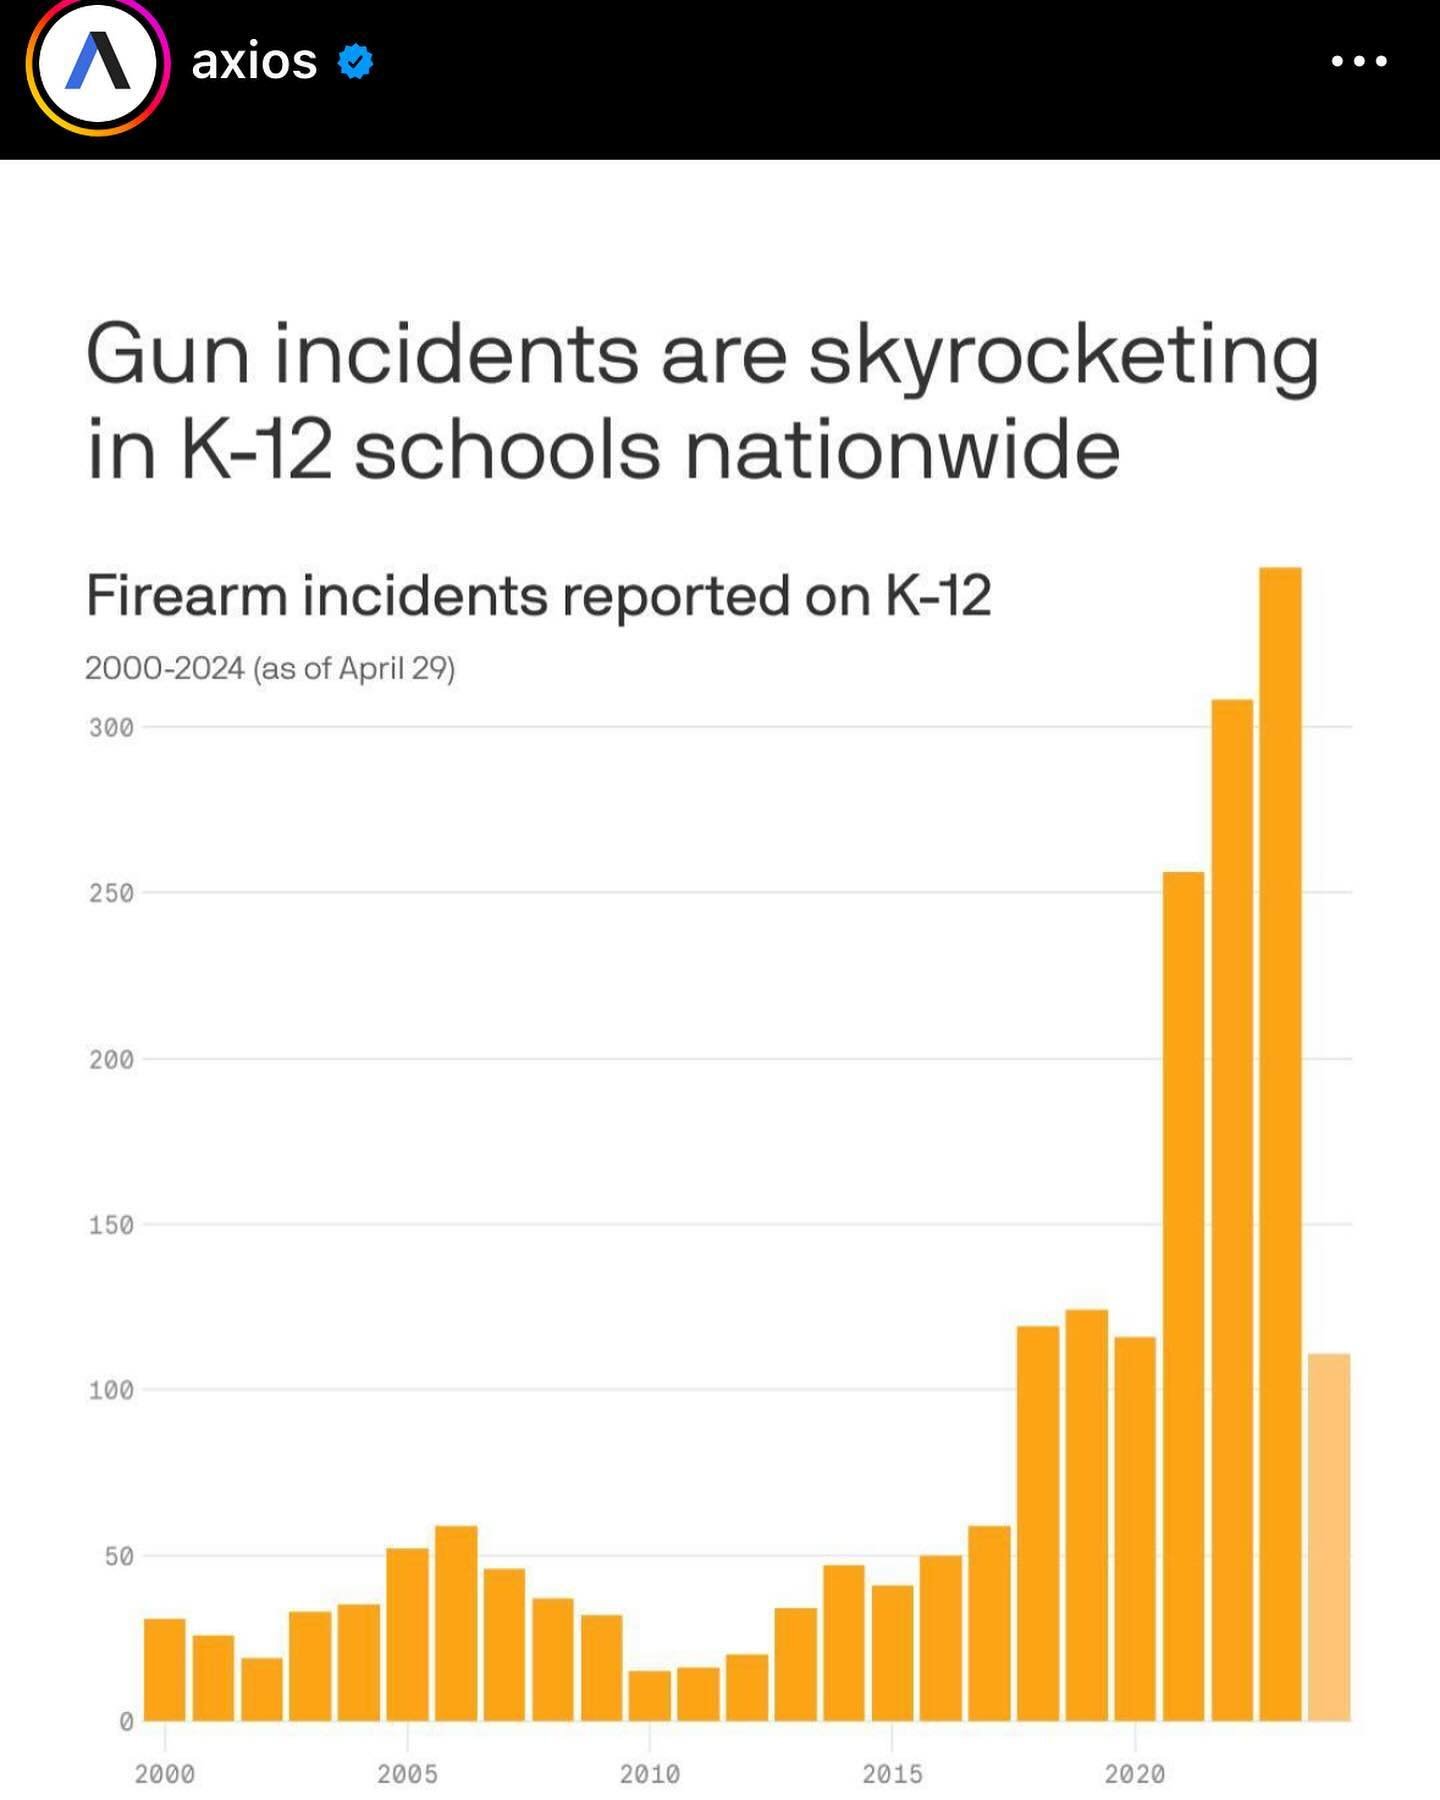 &ldquo;There were 1,468 firearm incidents at K-12 schools in the U.S. in the decade ending in 2023, a 324% increase from the prior decade&rsquo;s 346 incidents.

The big picture: Absent significant gun reform, schools are increasingly turning to othe